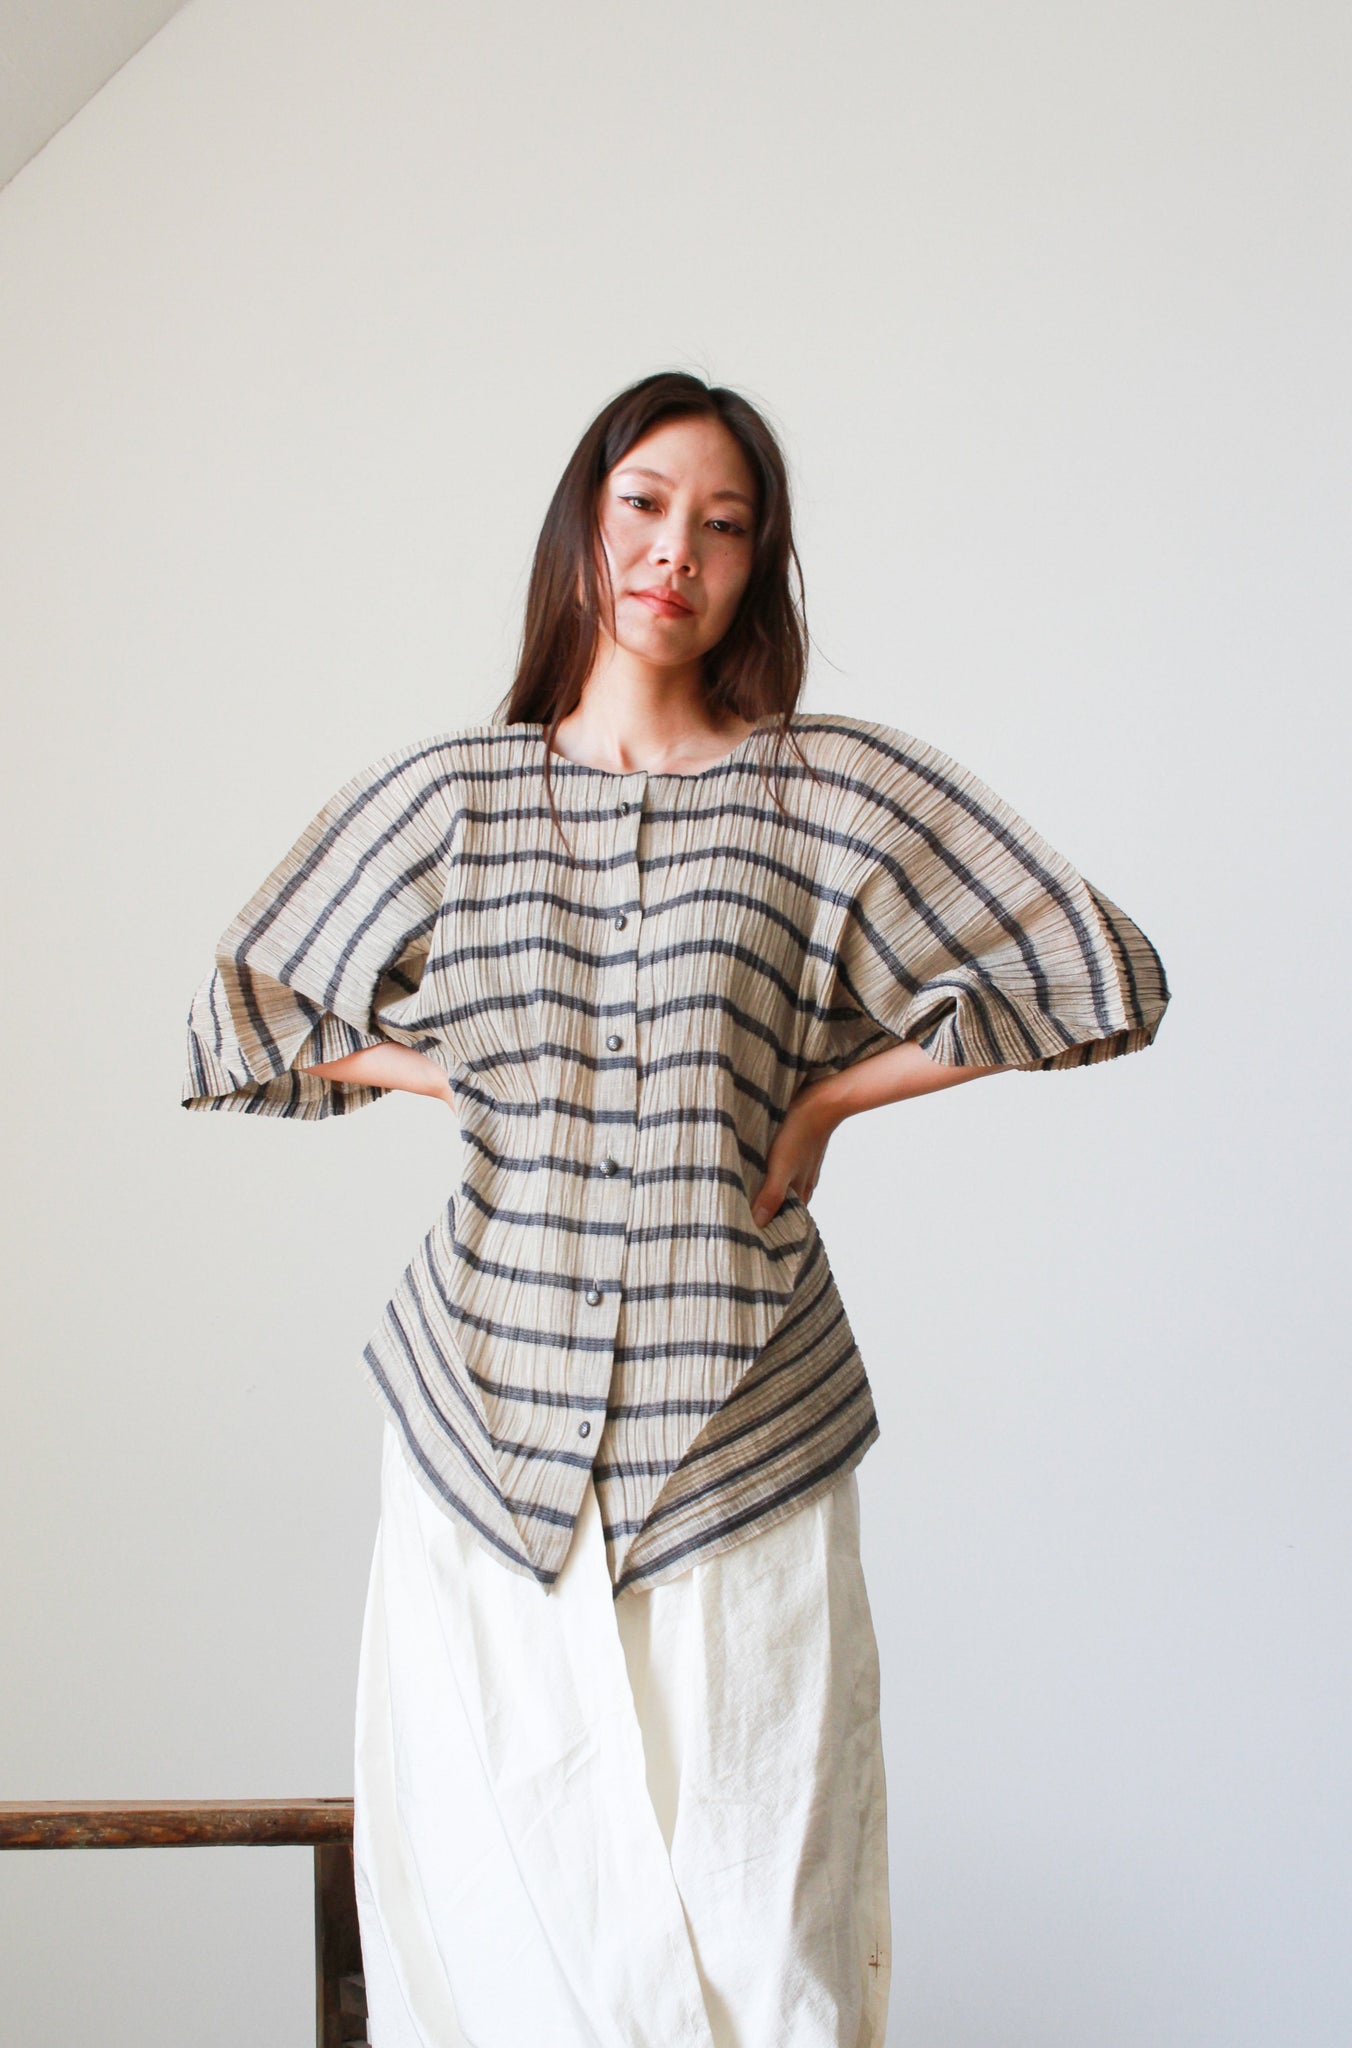 1980s Issey Miyake Iconic Pleated Structural Blouse